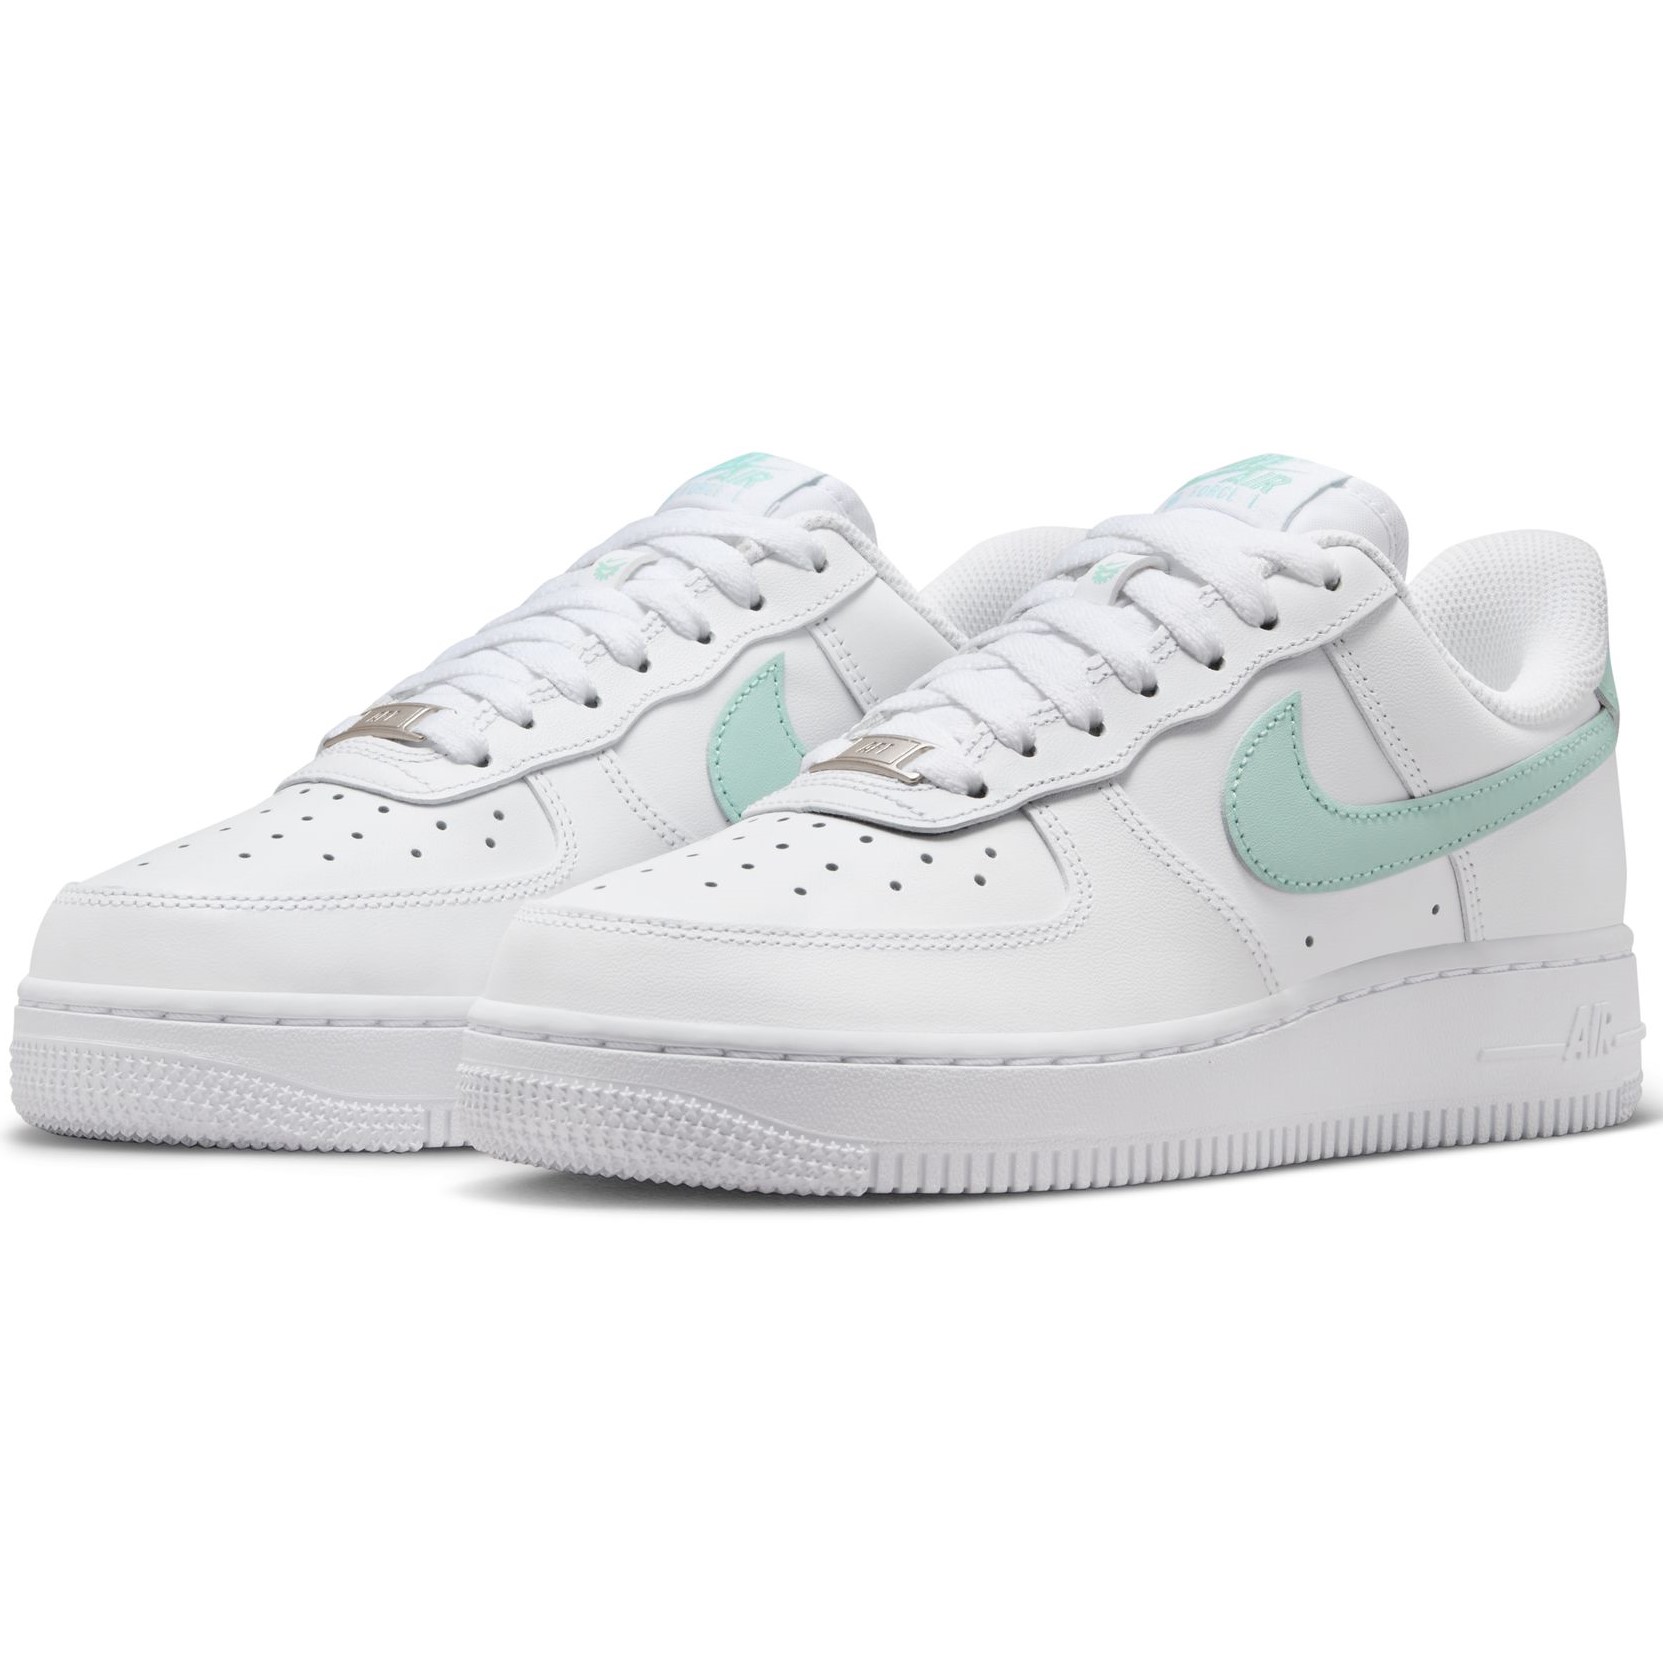 GIÀY NIKE NỮ AIR FORCE 1 07 EASYON WHITE ICE JADE WOMENS SHOES DX5883-101 2